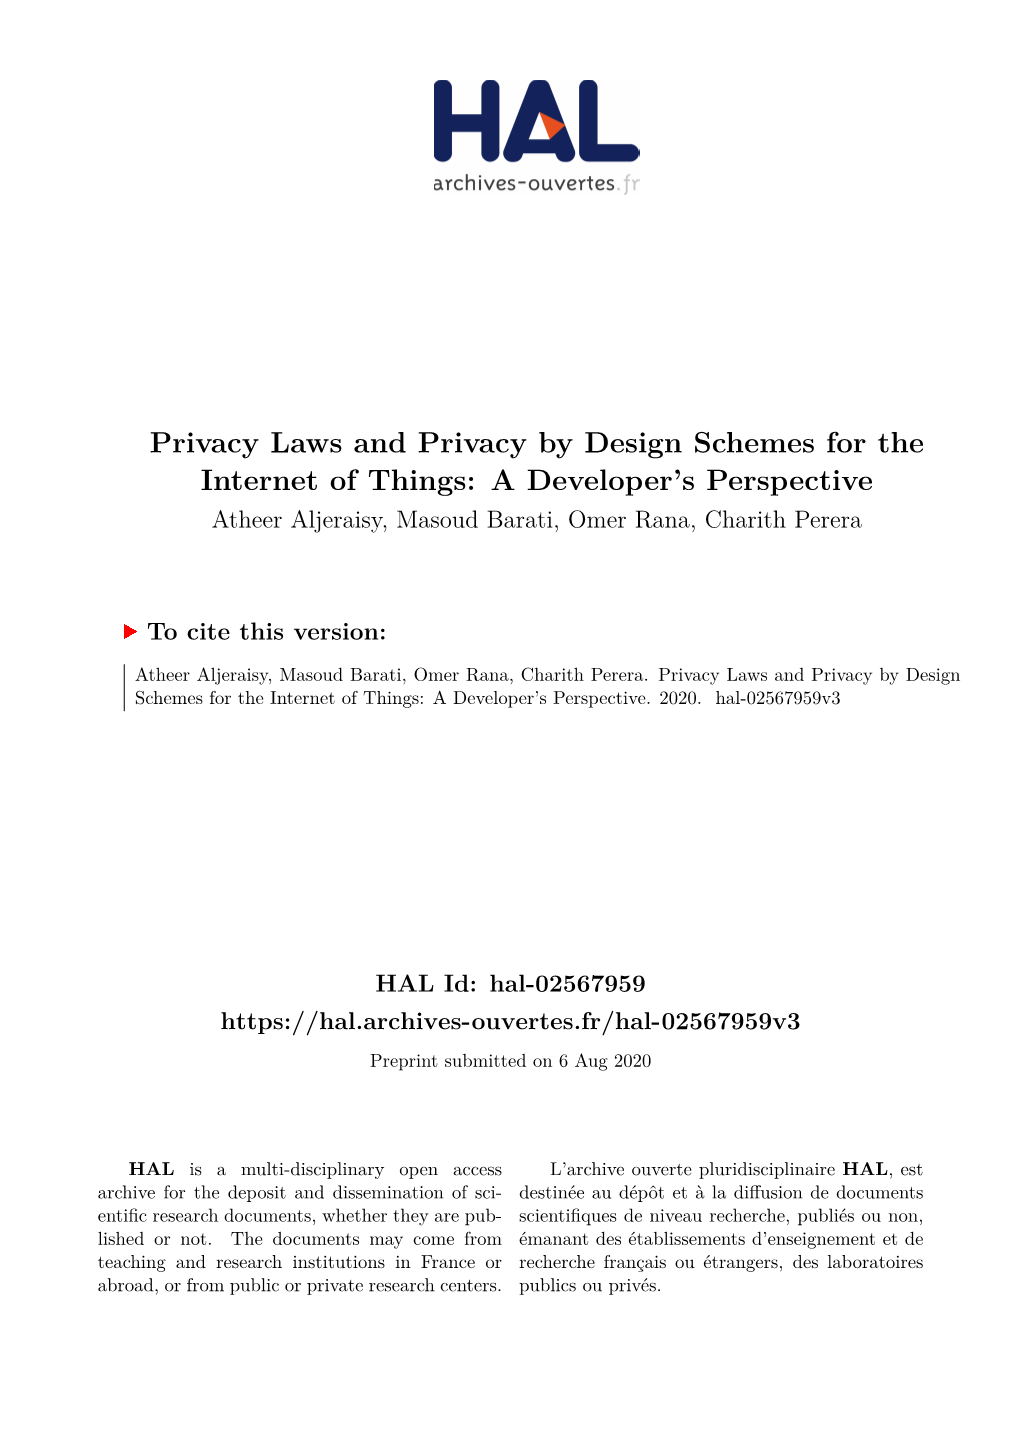 Privacy Laws and Privacy by Design Schemes for the Internet of Things: a Developer's Perspective